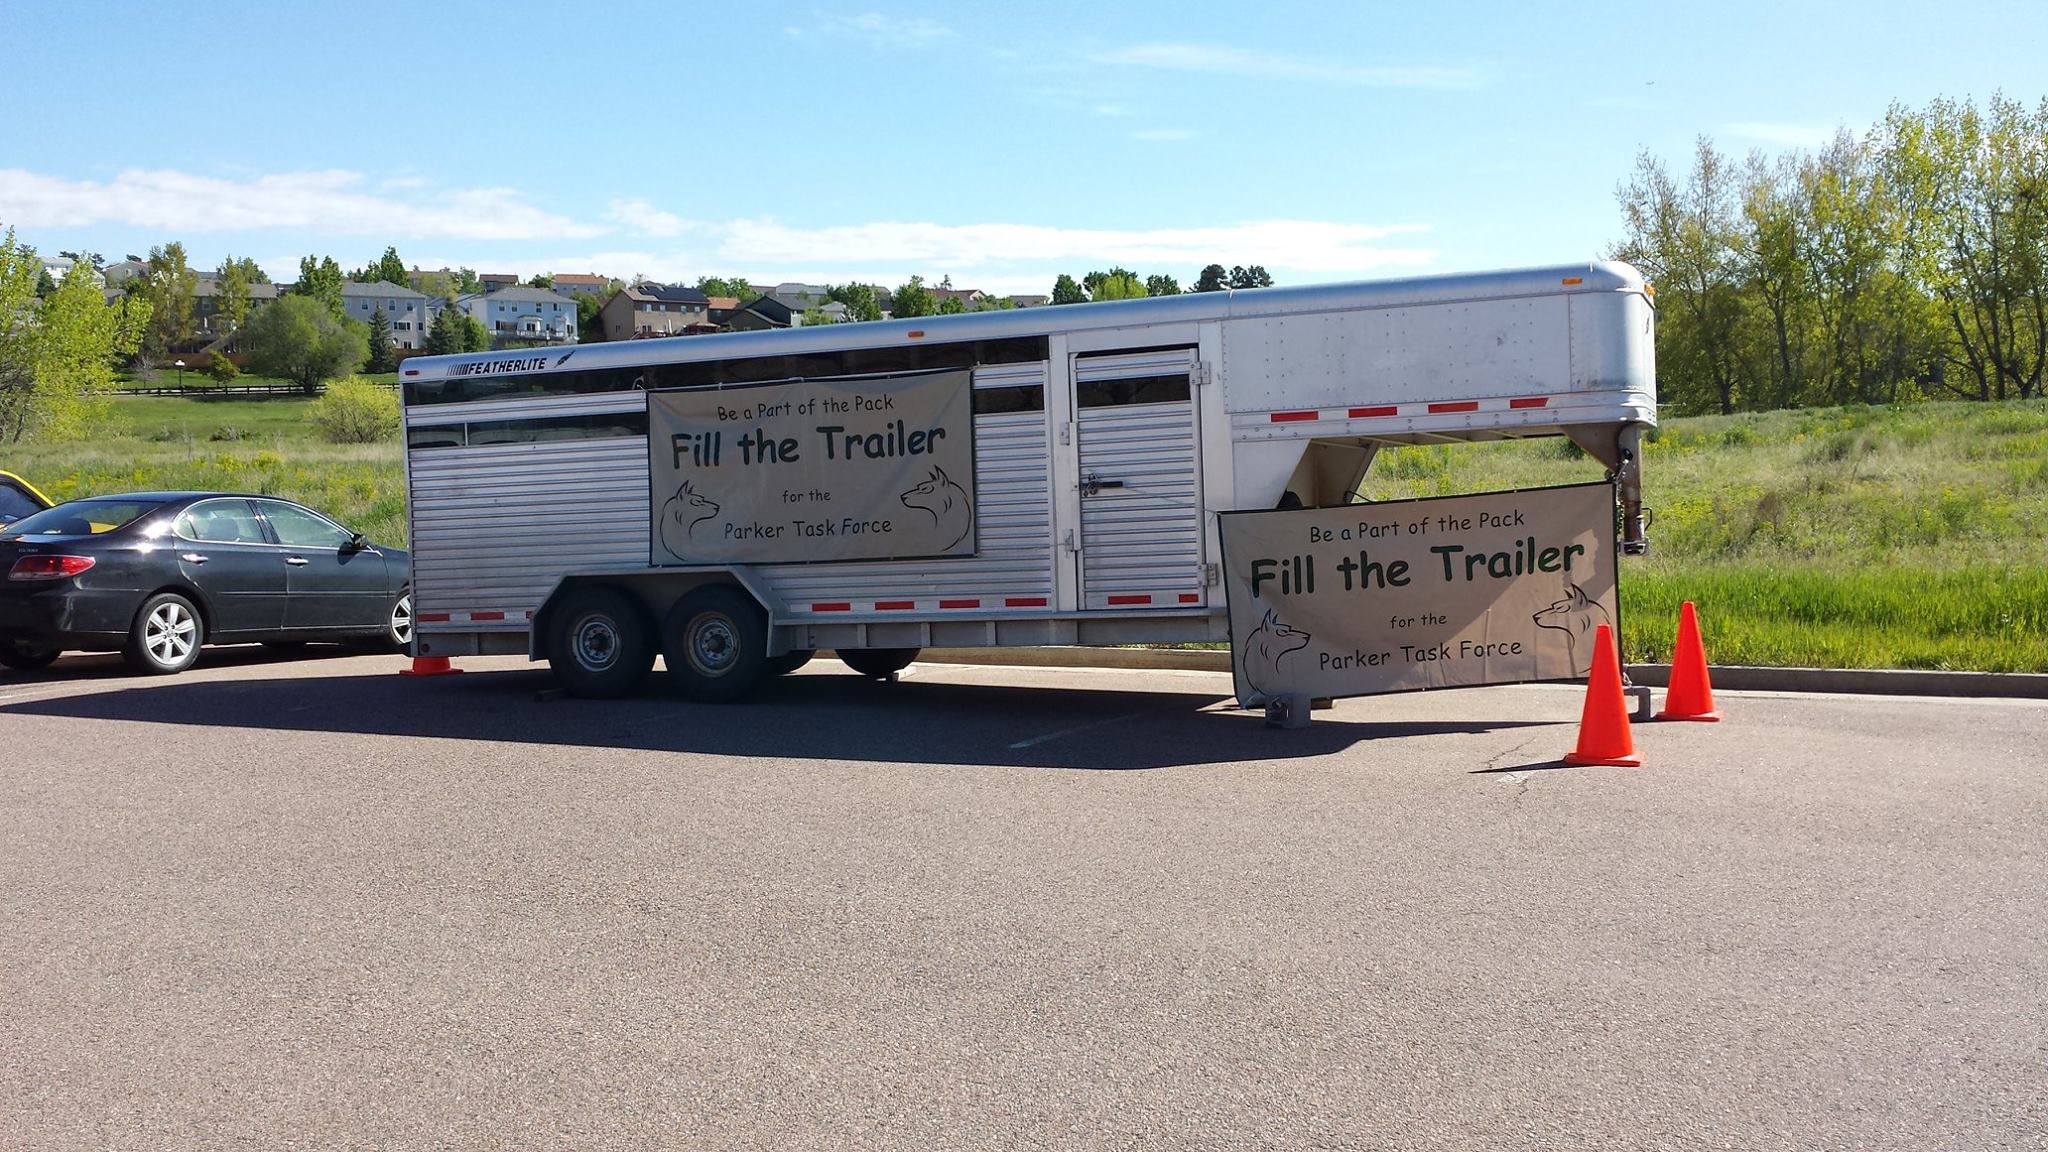 2015 fill the trailer fundraiswer